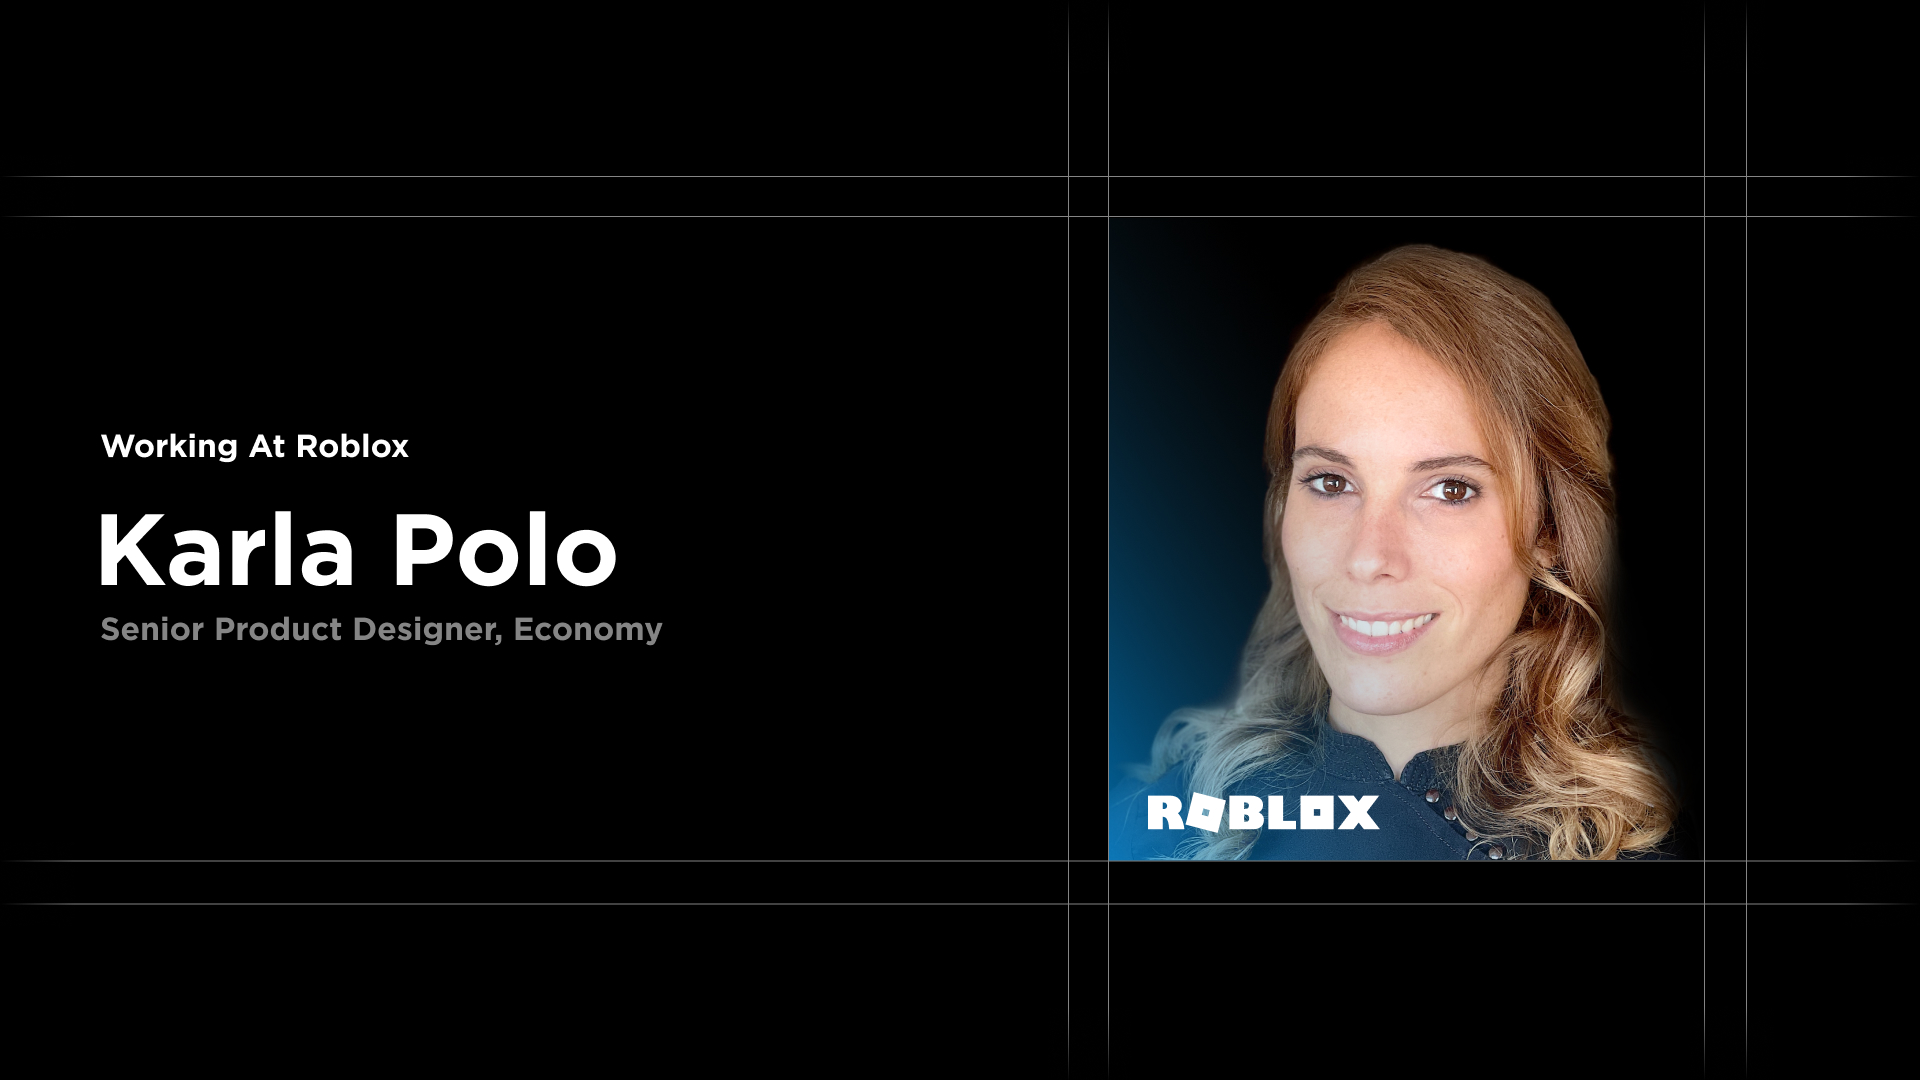 Working at Roblox: Meet Karla Polo